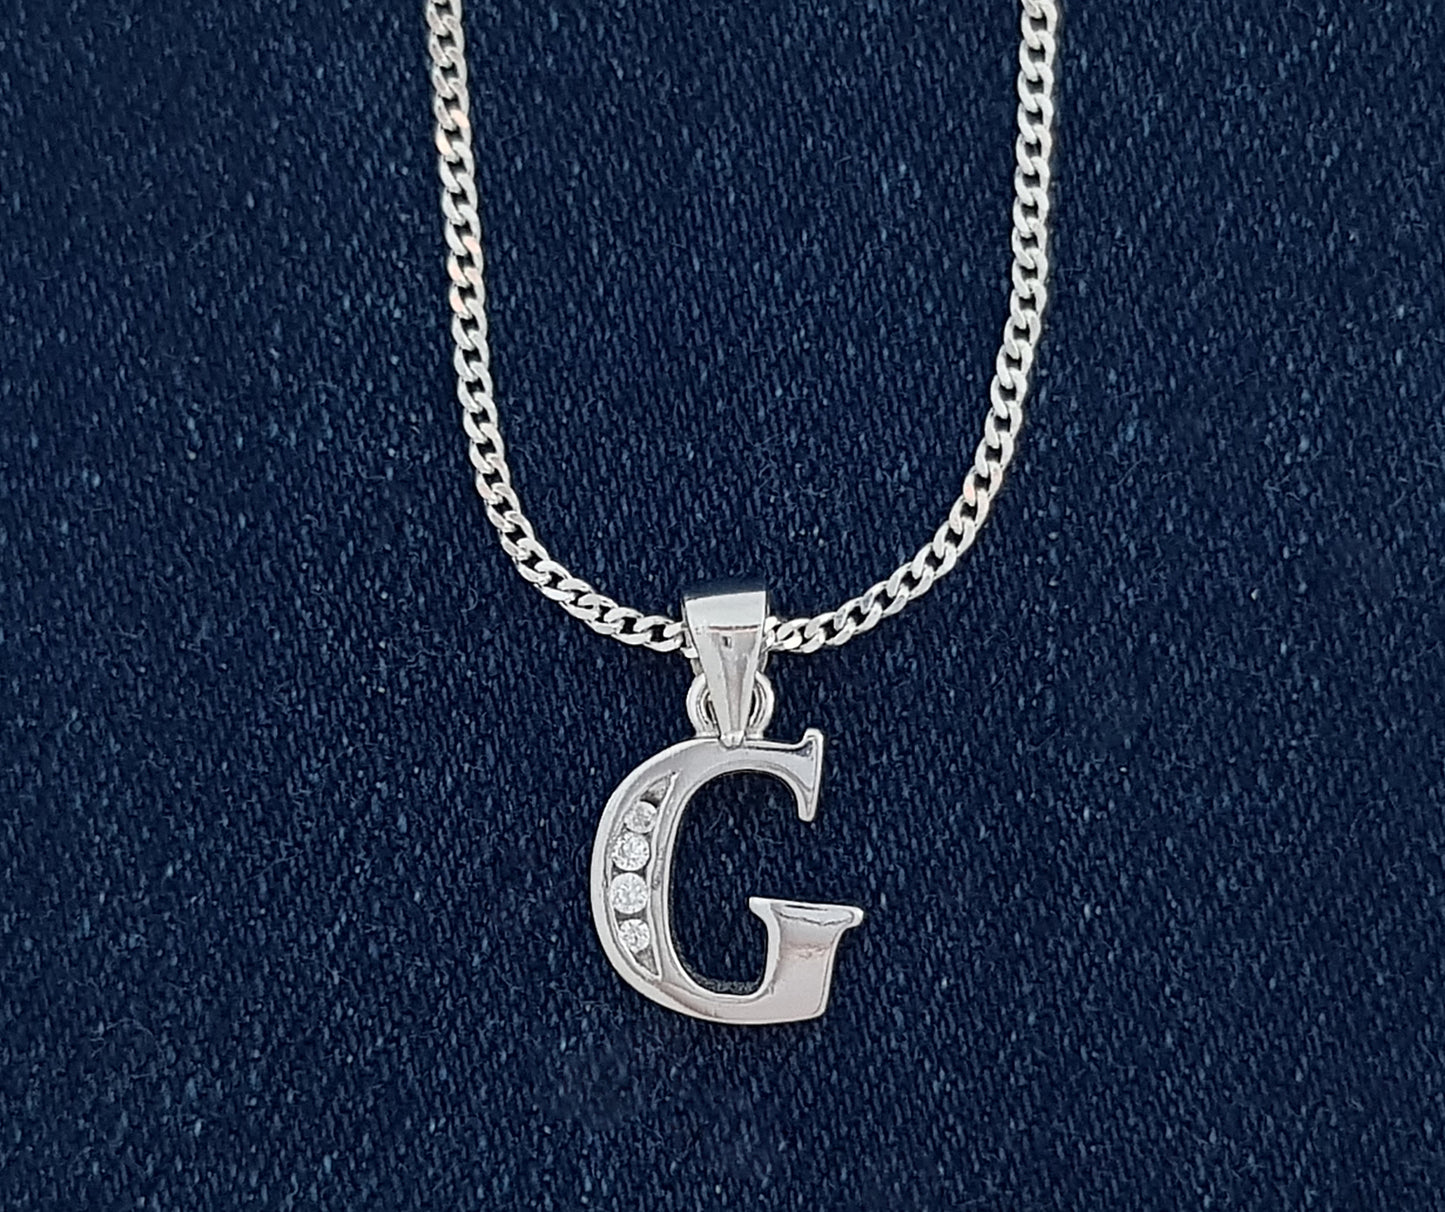 Sterling Silver Initial with Cubic Zirconia Stones- "G" Initial or Letter